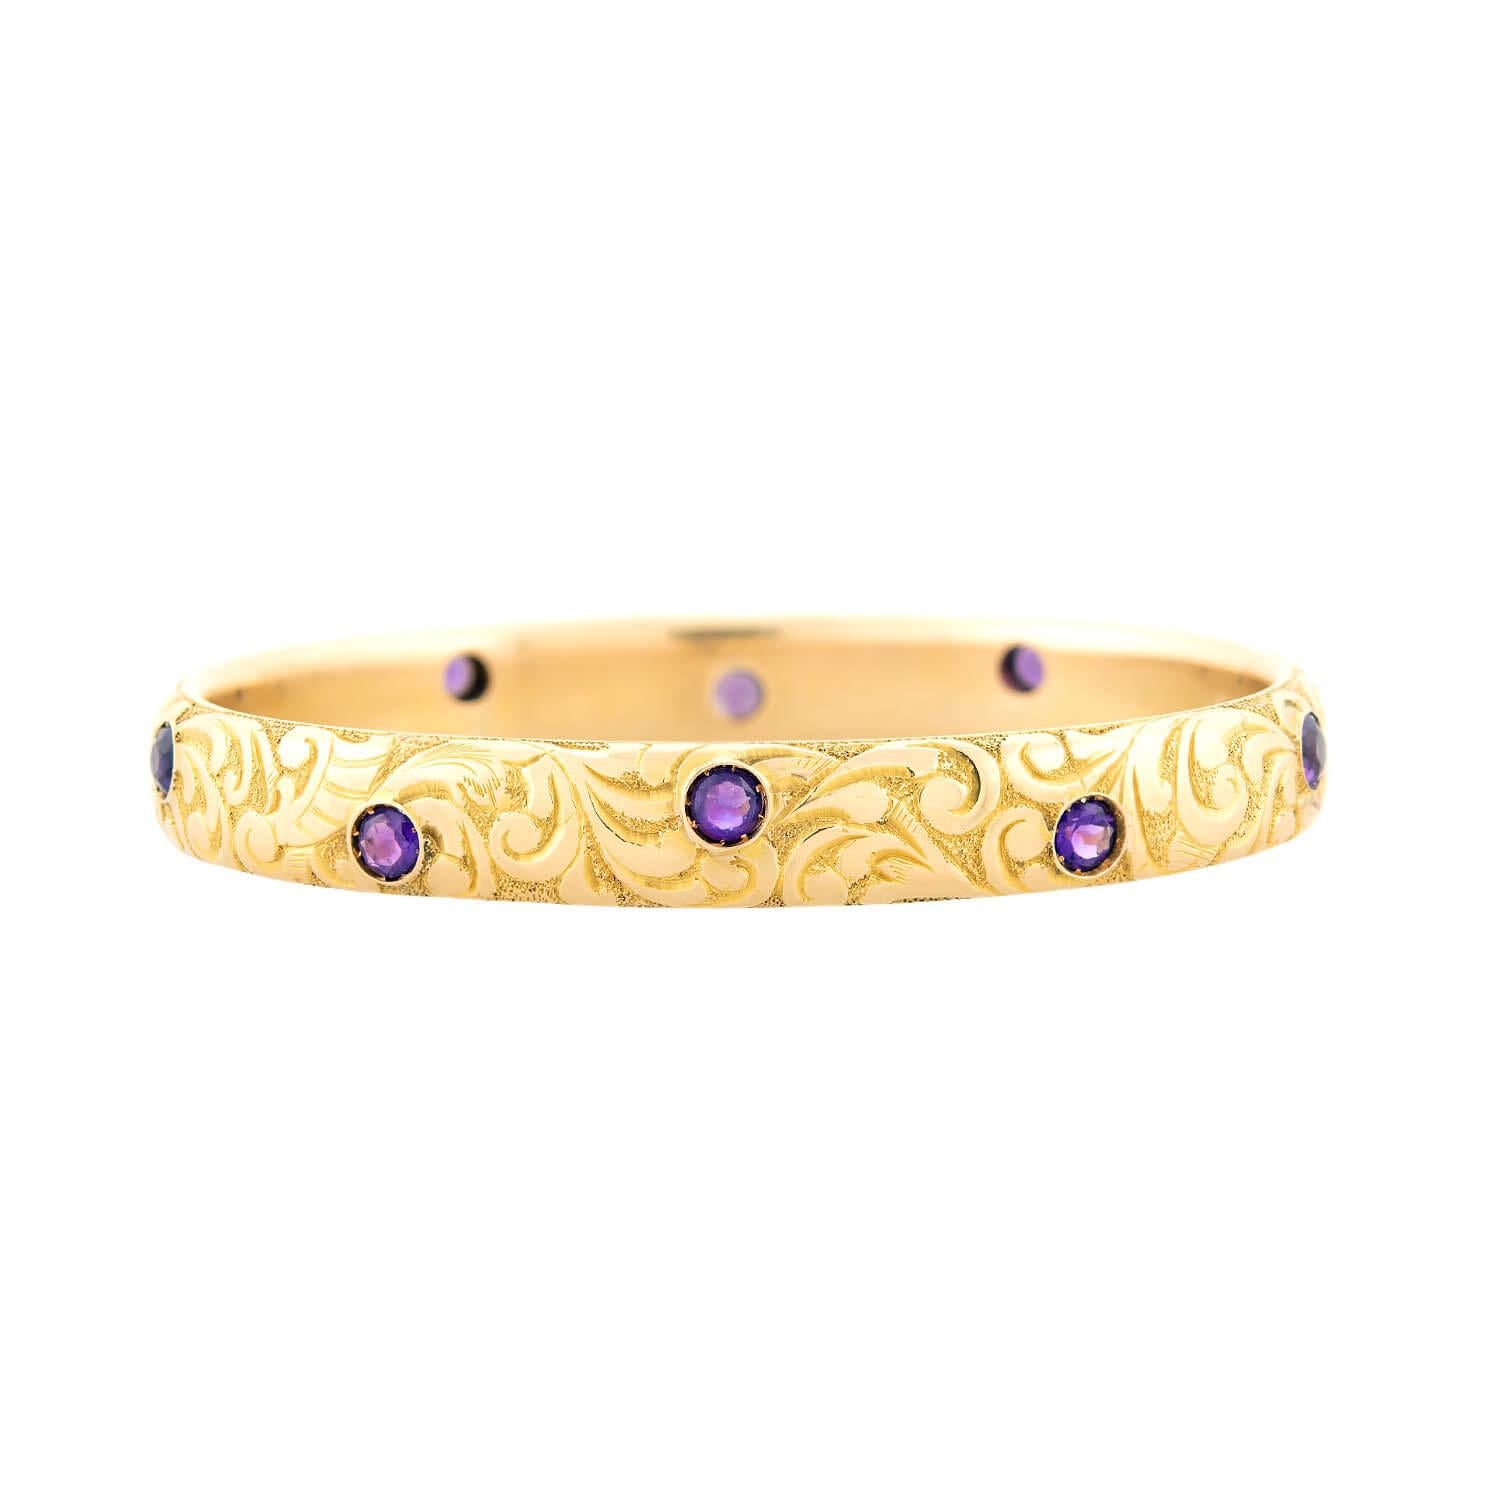 Victorian 14k Amethyst Carved Scrolling Motif Bracelet In Good Condition For Sale In Narberth, PA